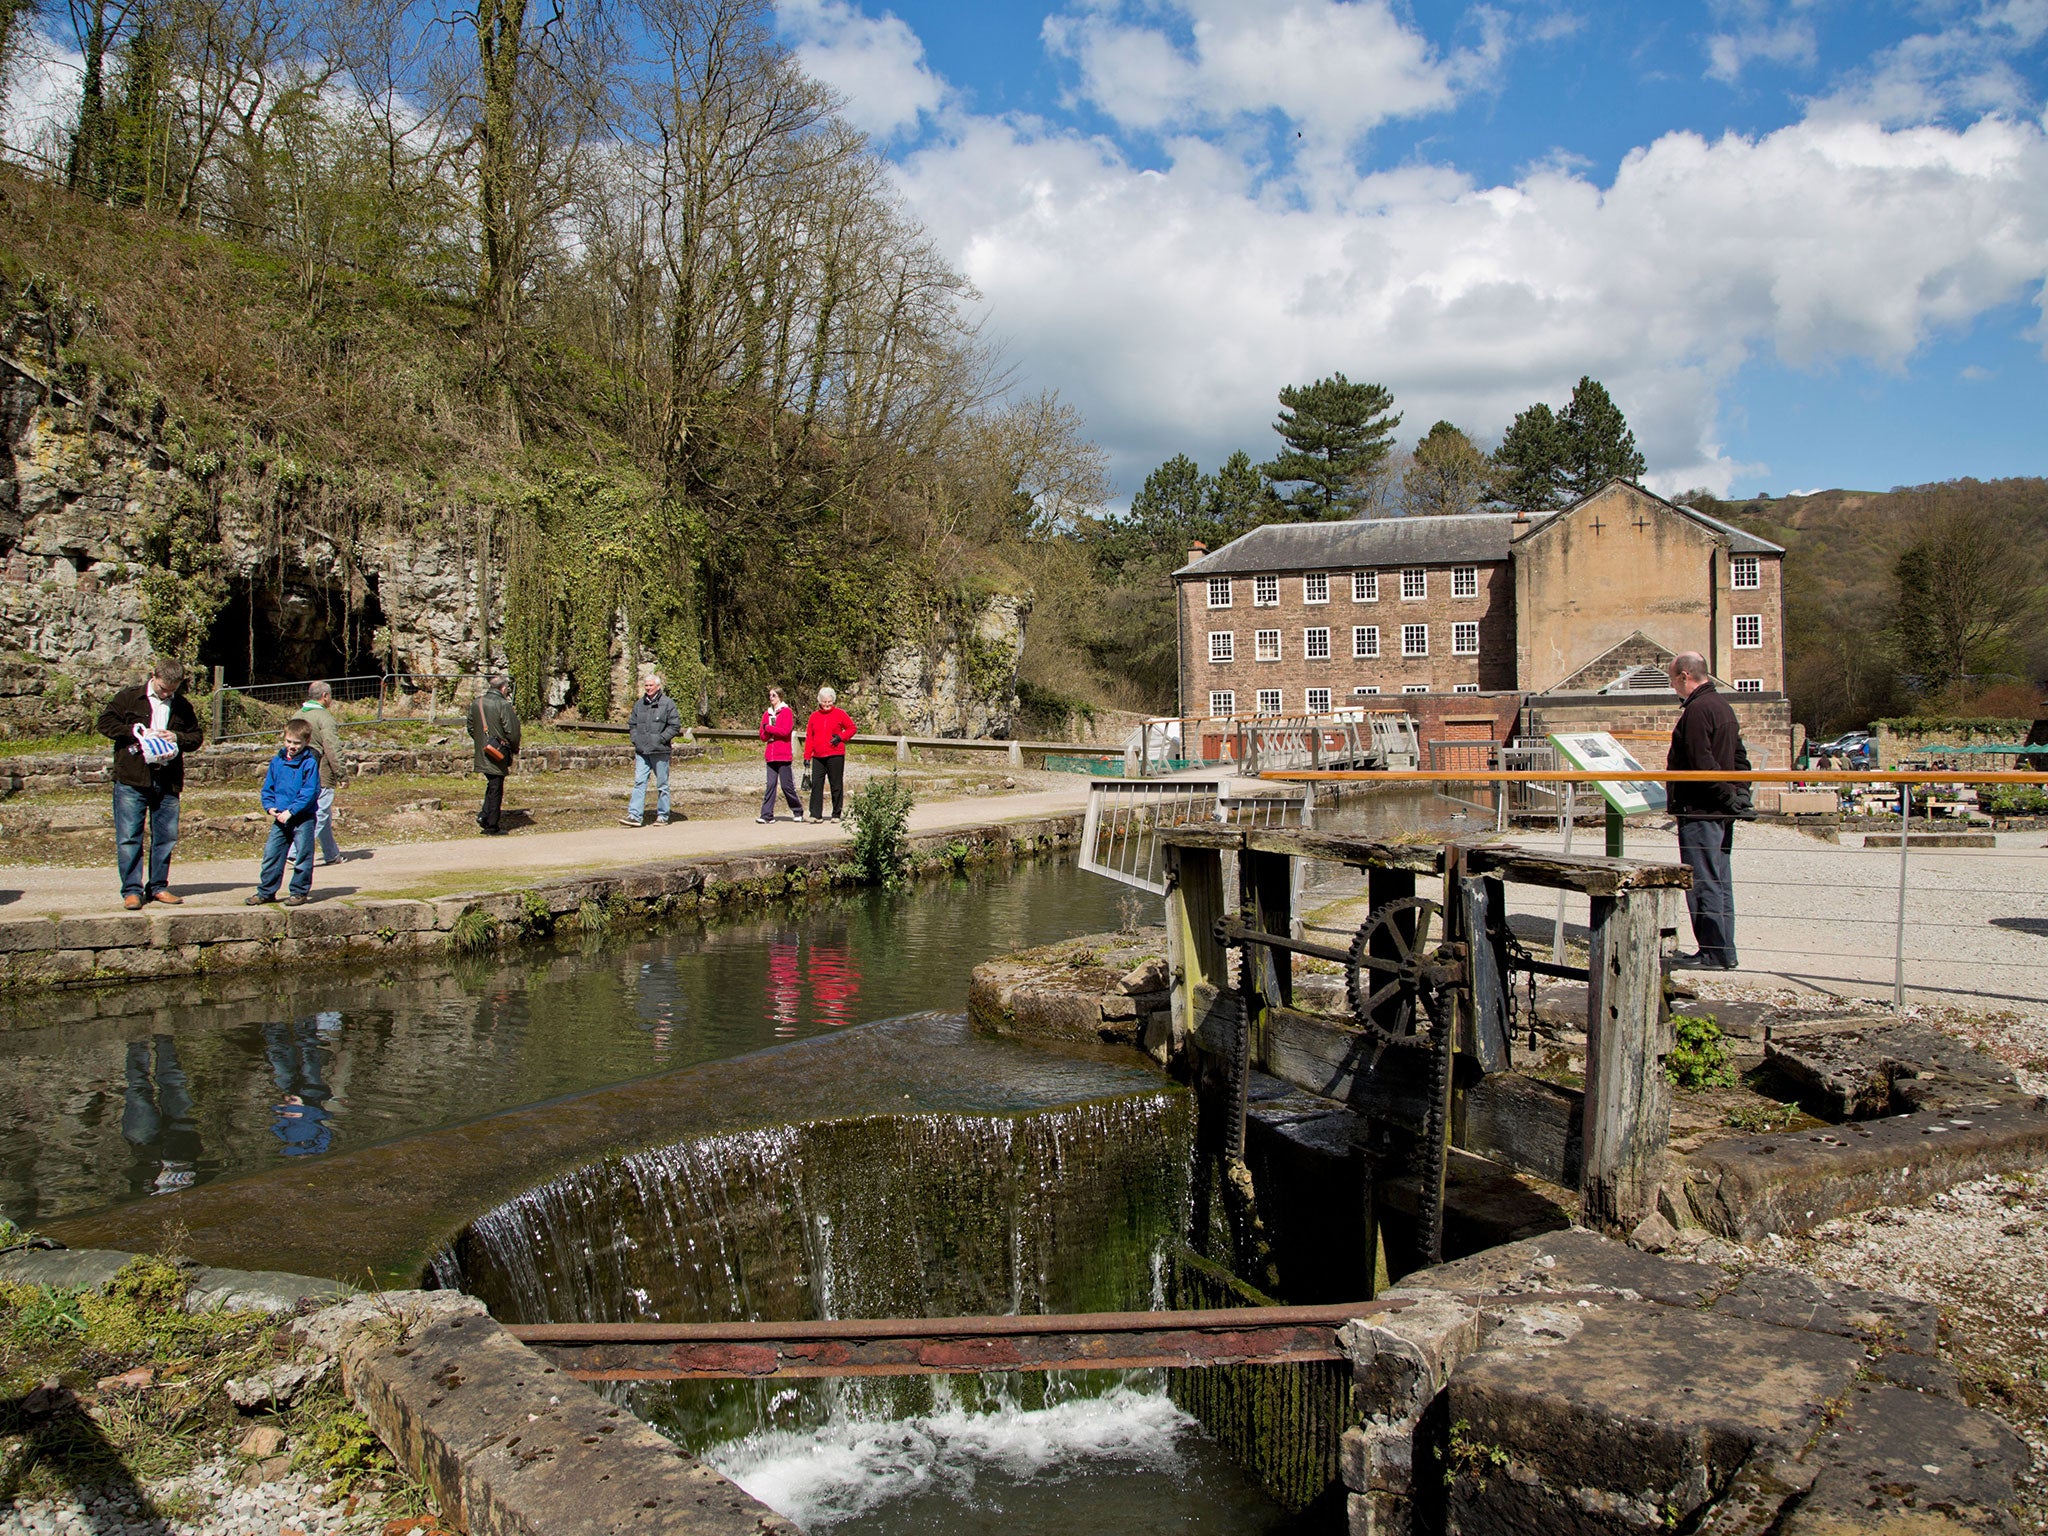 Cromford Mill, scene of Arkwright’s valuable innovations which Britain fought to protect